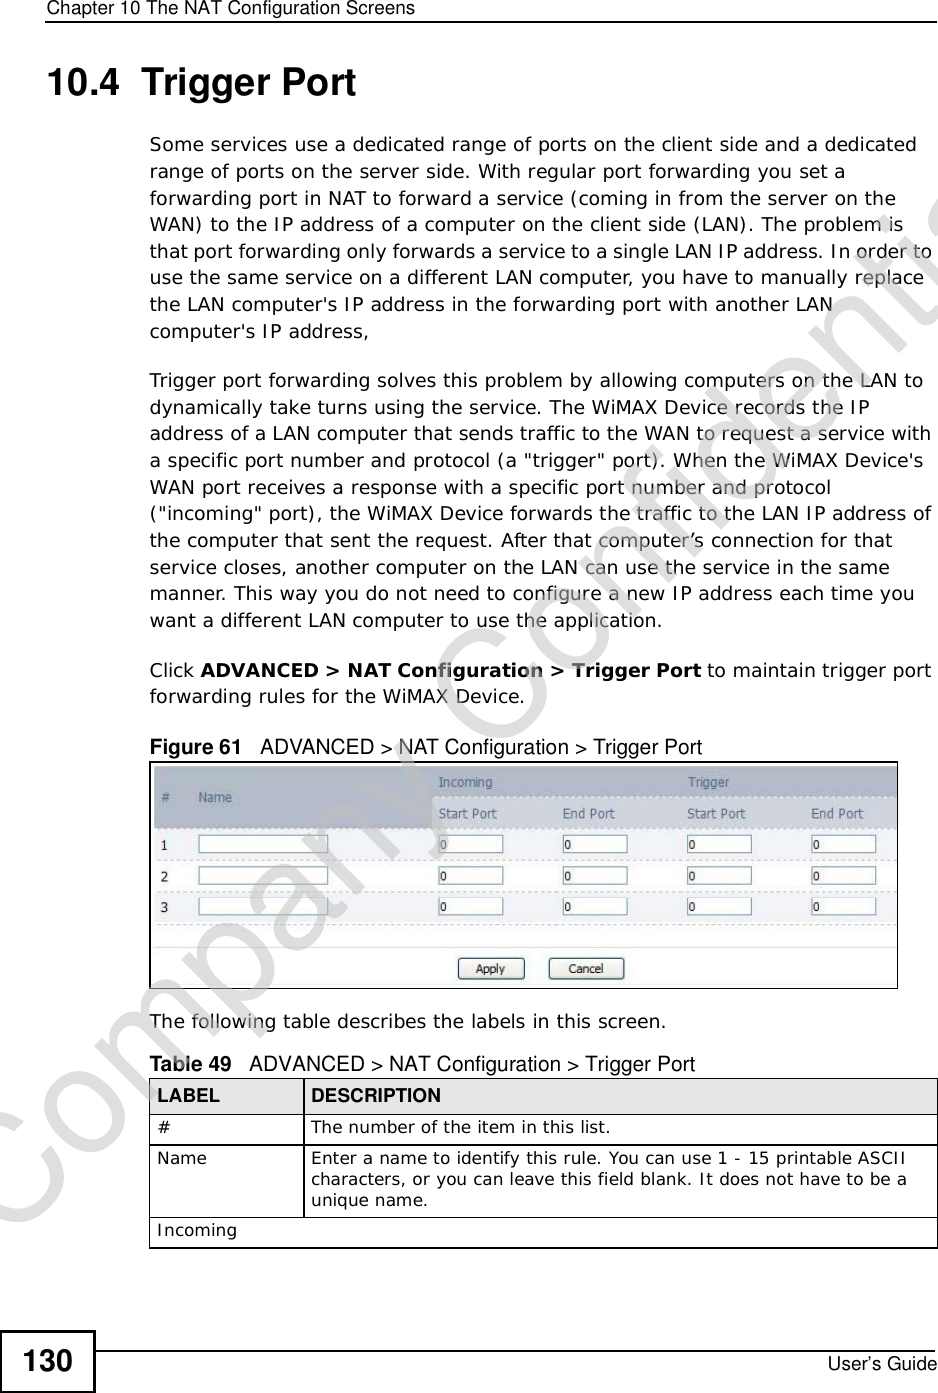 Chapter 10The NAT Configuration ScreensUser’s Guide13010.4  Trigger PortSome services use a dedicated range of ports on the client side and a dedicated range of ports on the server side. With regular port forwarding you set a forwarding port in NAT to forward a service (coming in from the server on the WAN) to the IP address of a computer on the client side (LAN). The problem is that port forwarding only forwards a service to a single LAN IP address. In order to use the same service on a different LAN computer, you have to manually replace the LAN computer&apos;s IP address in the forwarding port with another LAN computer&apos;s IP address, Trigger port forwarding solves this problem by allowing computers on the LAN to dynamically take turns using the service. The WiMAX Device records the IP address of a LAN computer that sends traffic to the WAN to request a service with a specific port number and protocol (a &quot;trigger&quot; port). When the WiMAX Device&apos;s WAN port receives a response with a specific port number and protocol (&quot;incoming&quot; port), the WiMAX Device forwards the traffic to the LAN IP address of the computer that sent the request. After that computer’s connection for that service closes, another computer on the LAN can use the service in the same manner. This way you do not need to configure a new IP address each time you want a different LAN computer to use the application.Click ADVANCED &gt; NAT Configuration &gt; Trigger Port to maintain trigger port forwarding rules for the WiMAX Device.Figure 61   ADVANCED &gt; NAT Configuration &gt; Trigger PortThe following table describes the labels in this screen.Table 49   ADVANCED &gt; NAT Configuration &gt; Trigger PortLABEL DESCRIPTION#The number of the item in this list.Name Enter a name to identify this rule. You can use 1 - 15 printable ASCII characters, or you can leave this field blank. It does not have to be a unique name.IncomingCompany Confidential